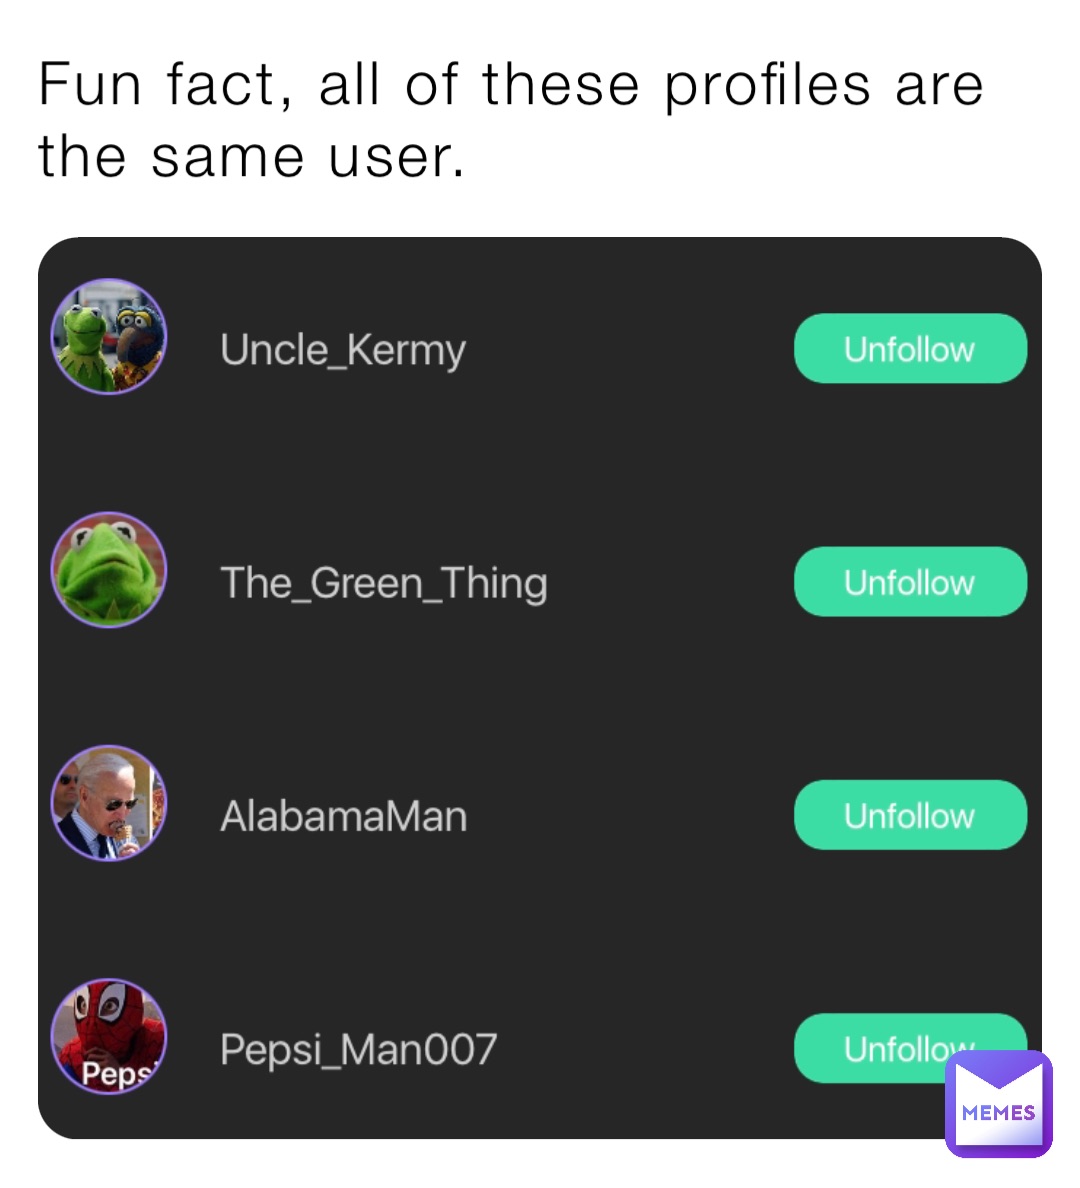 Fun fact, all of these profiles are the same user.